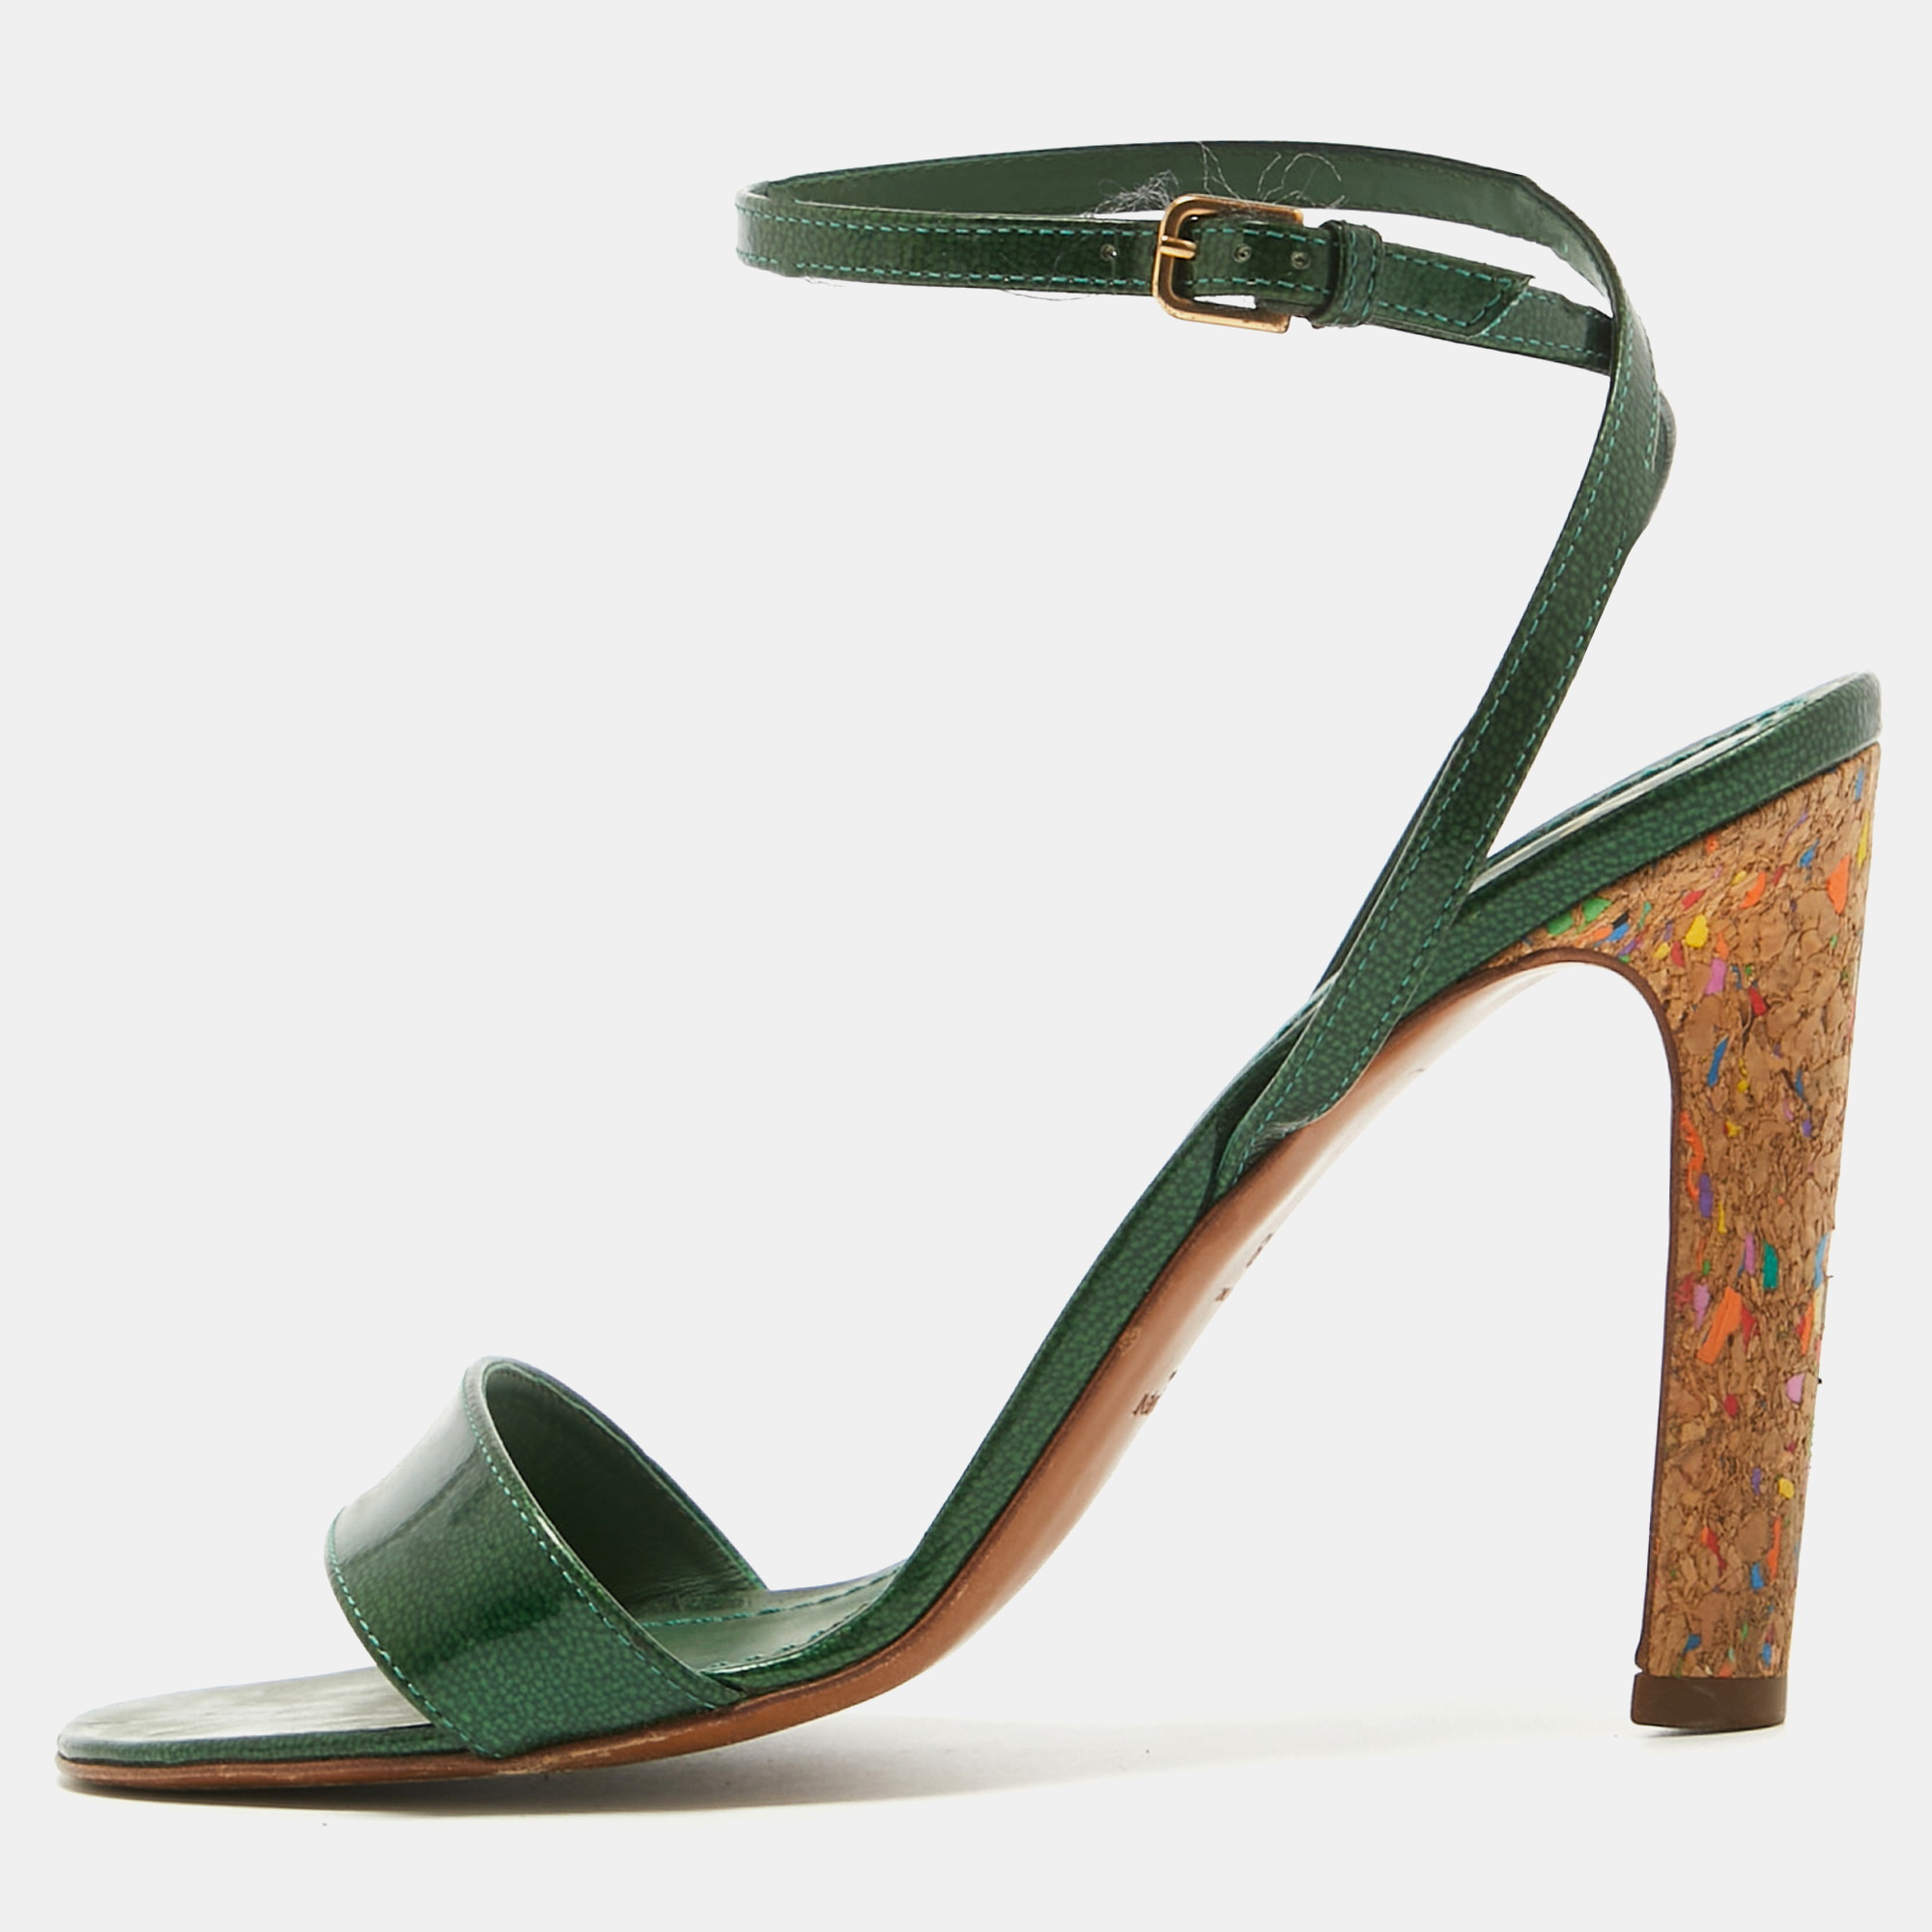 Yves saint laurent green patent leather ankle wrap sandals size 39